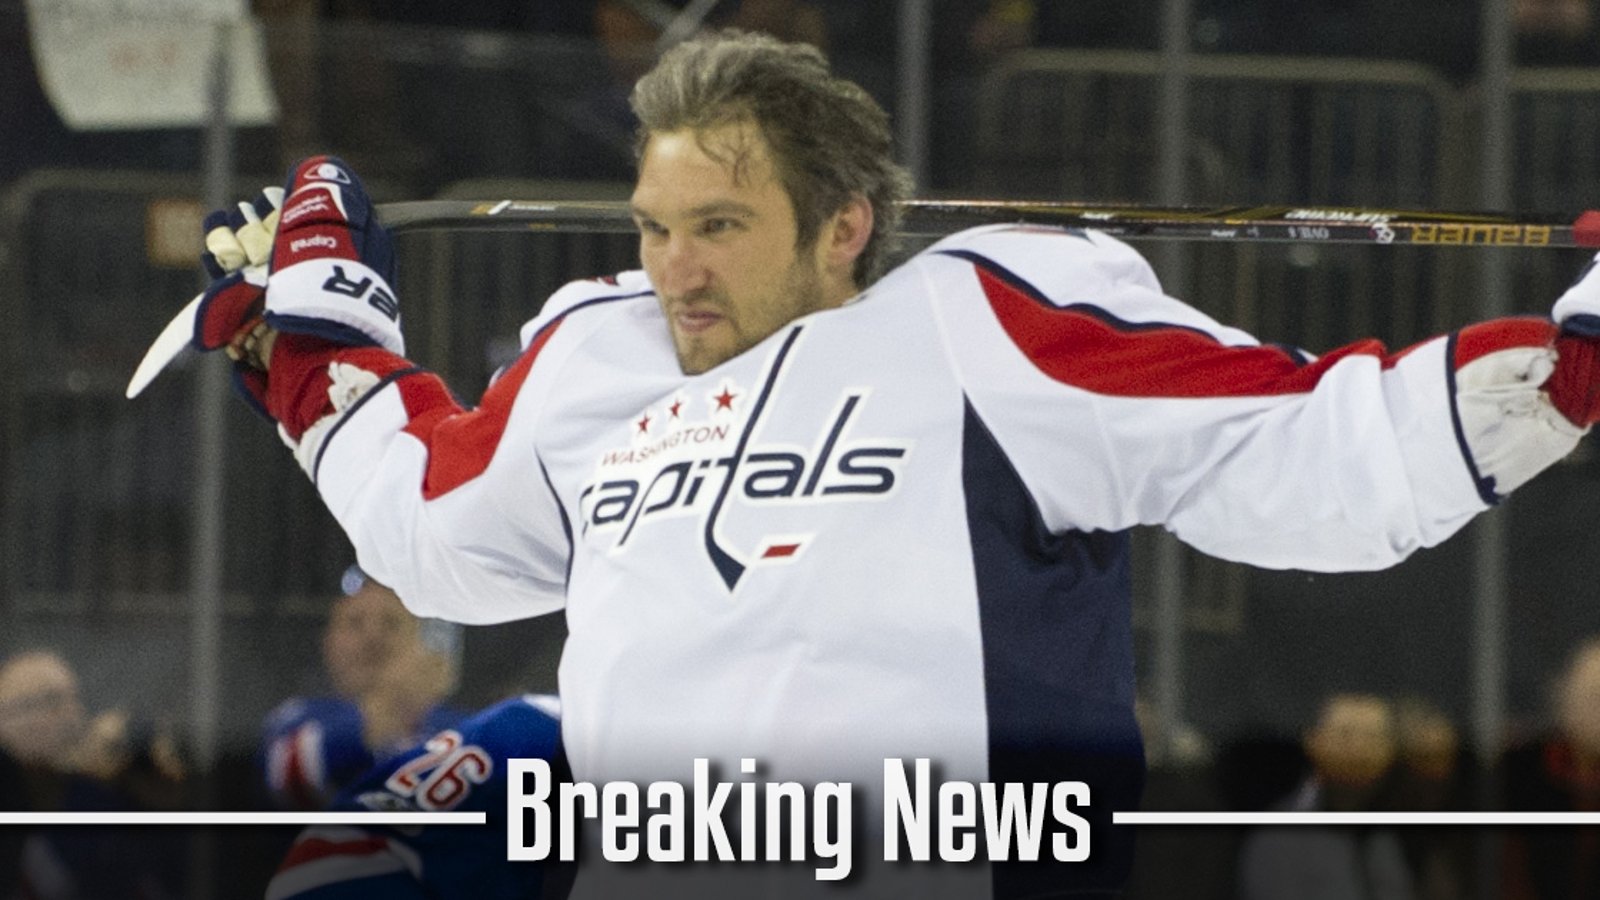 BREAKING: Alex Ovechkin will be the first NHL player wearing custom-painted skates.